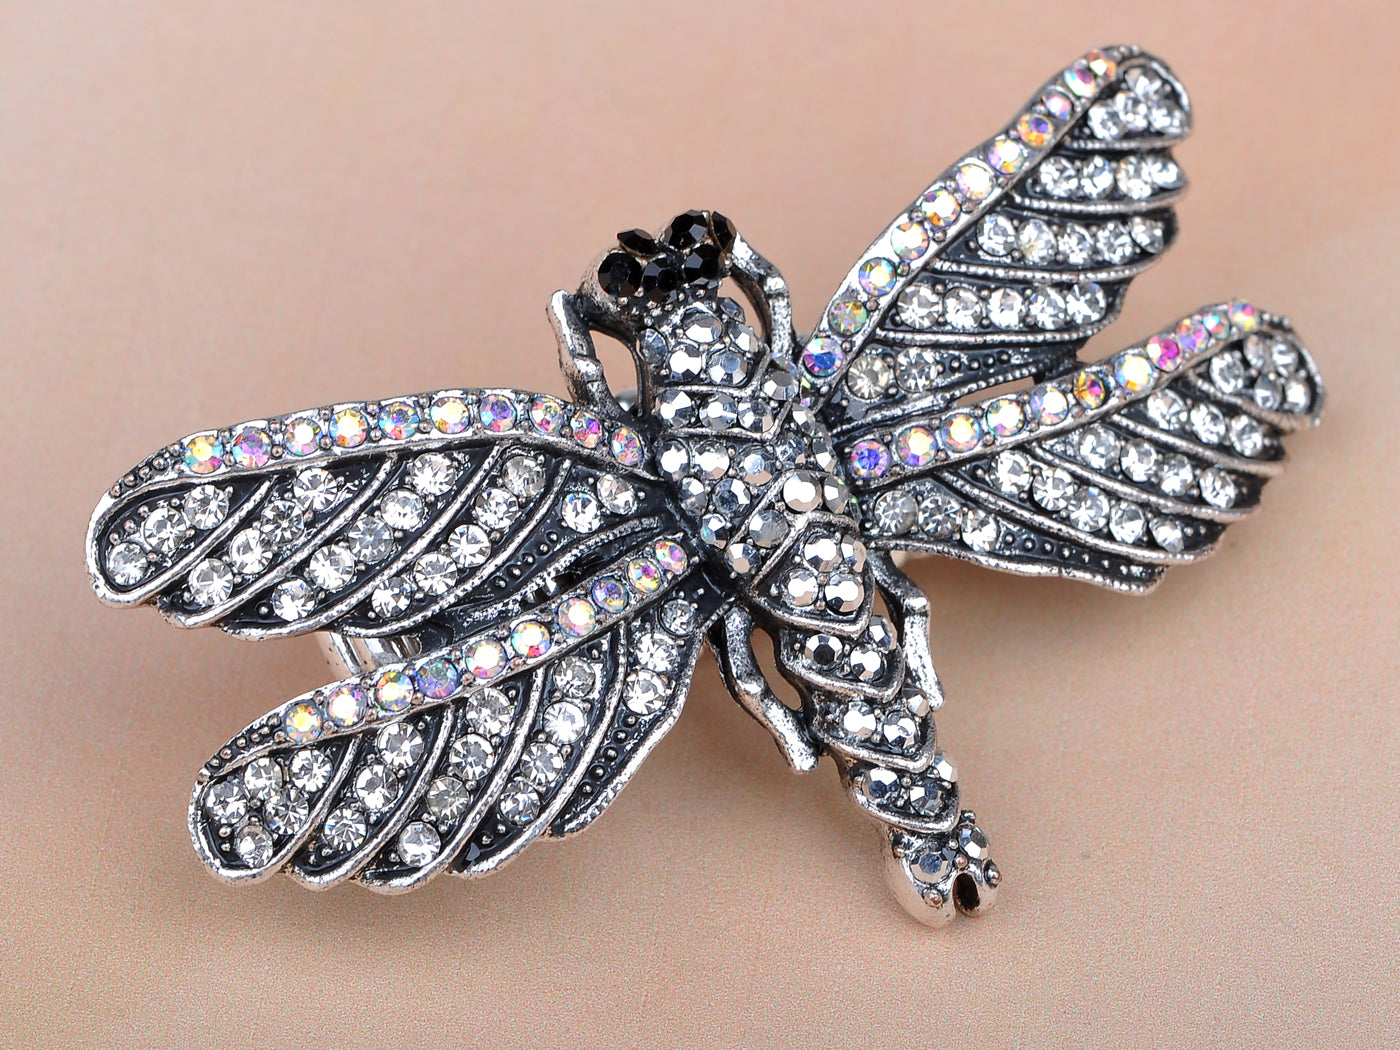 Giant Winged Dragonfly Bug Ring